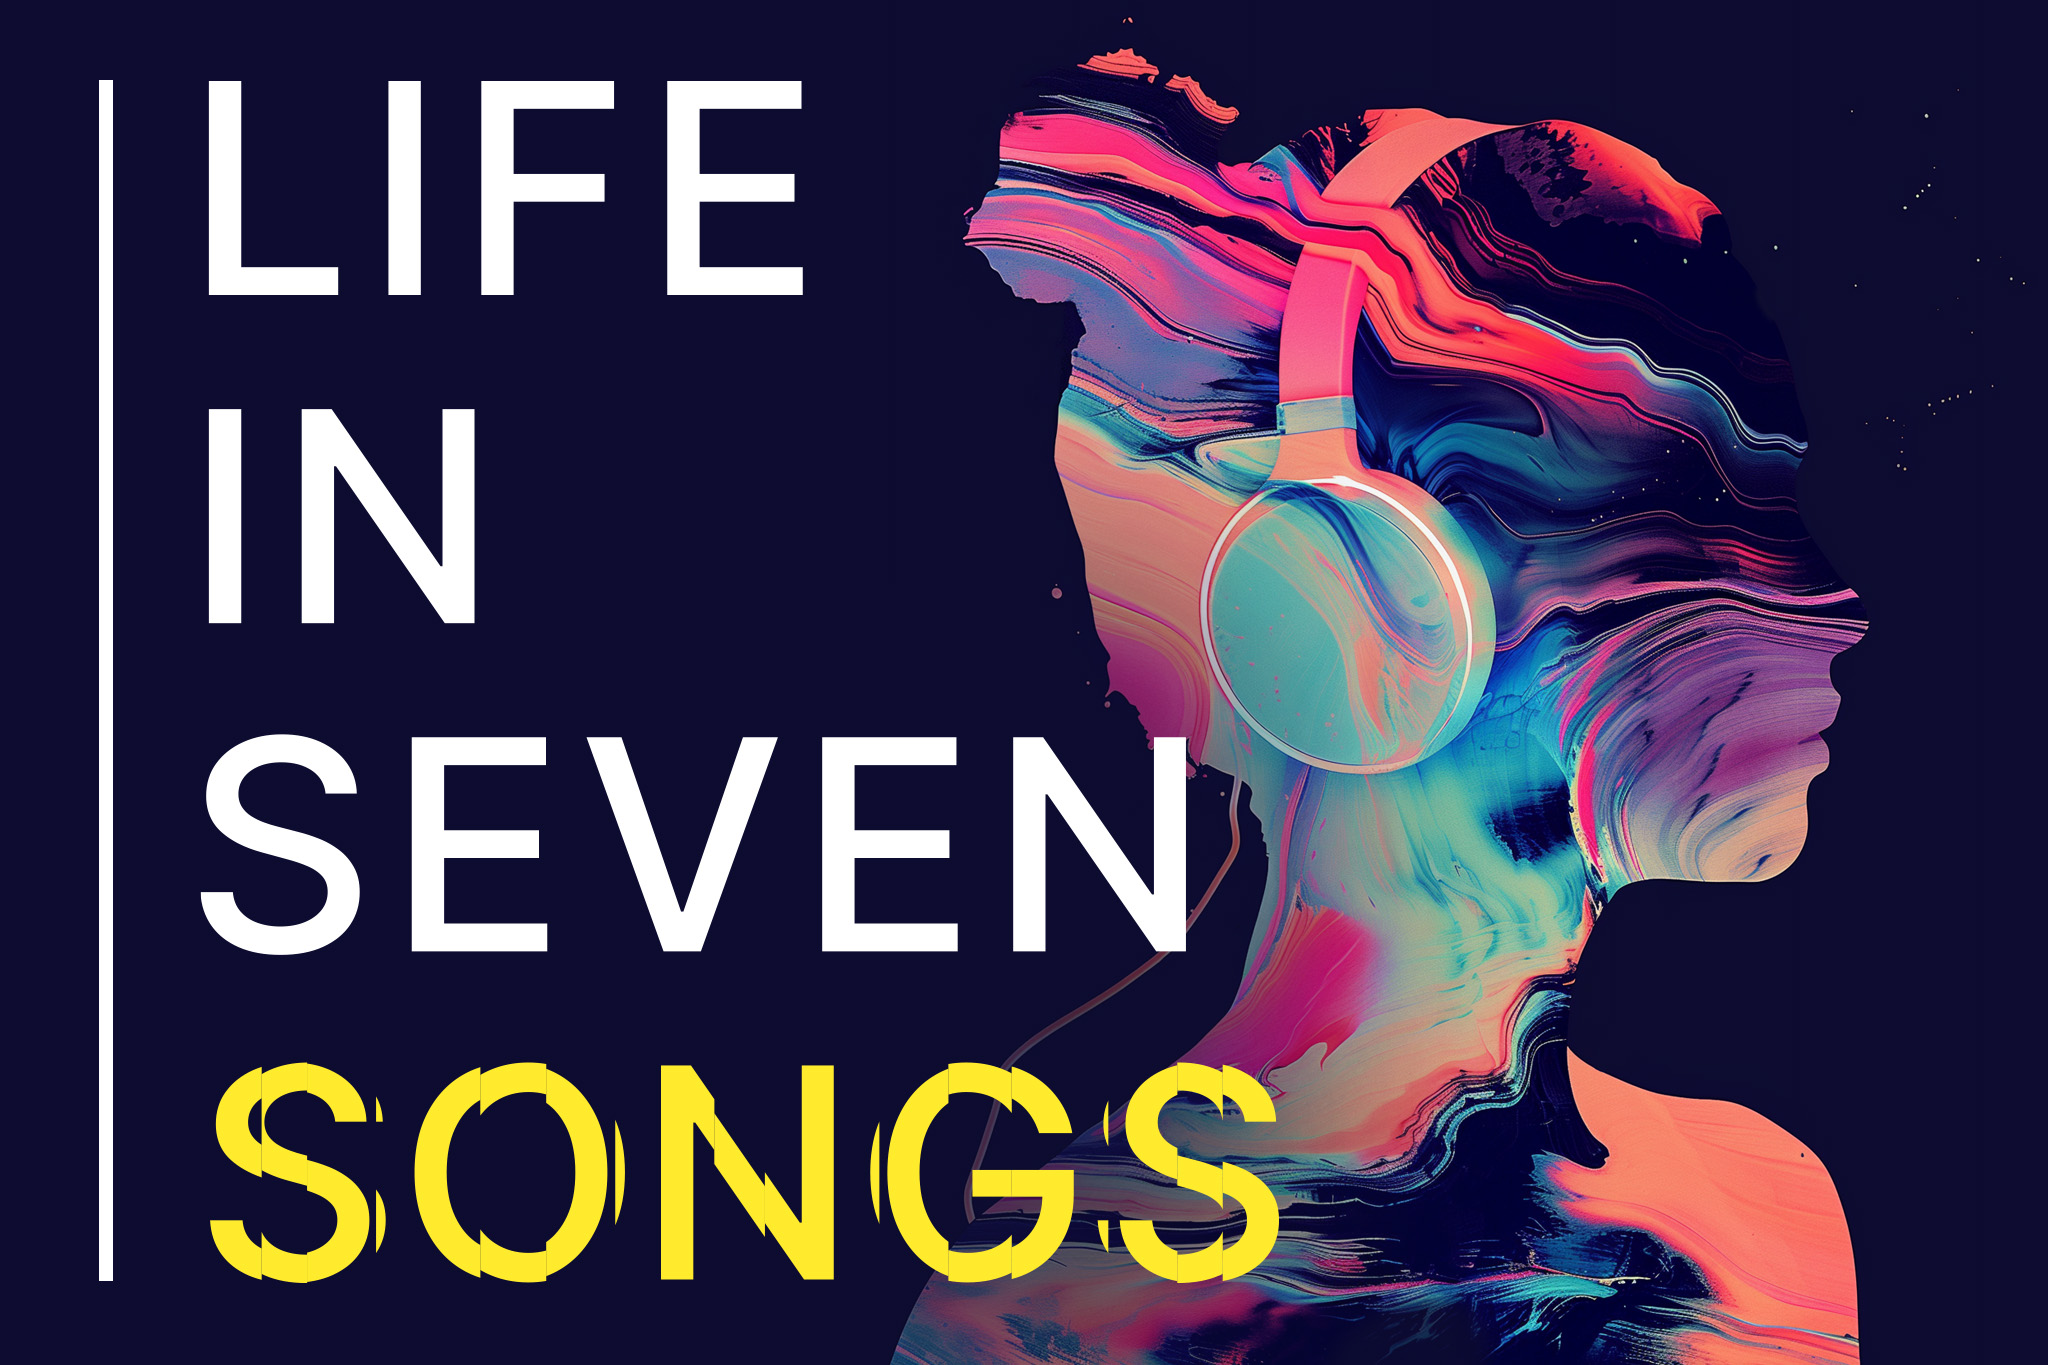 The podcast art for the show "Life in Seven Songs" depicts the silhouette of a woman wearing headphones with a pink, purple and yellow color palette.